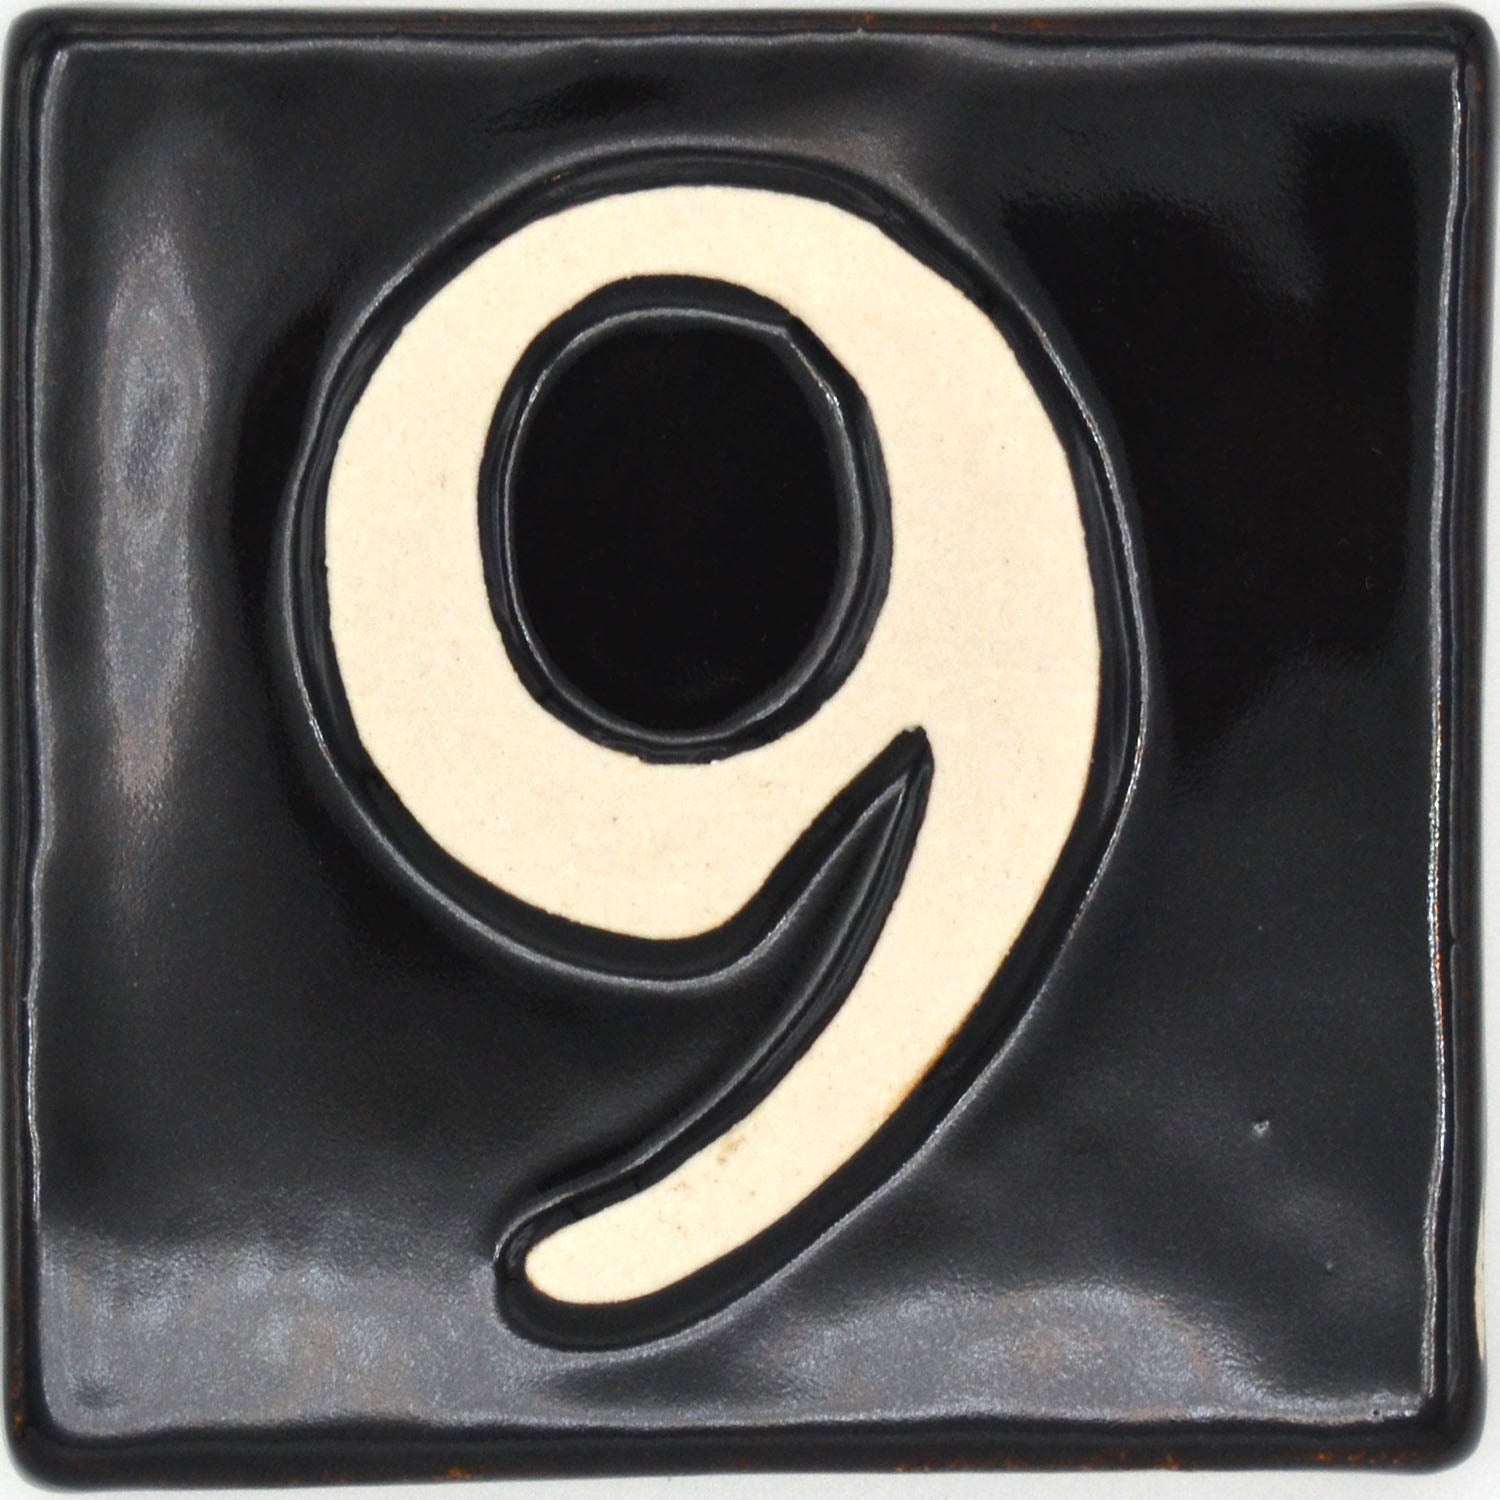 4x4 house number 9 tile